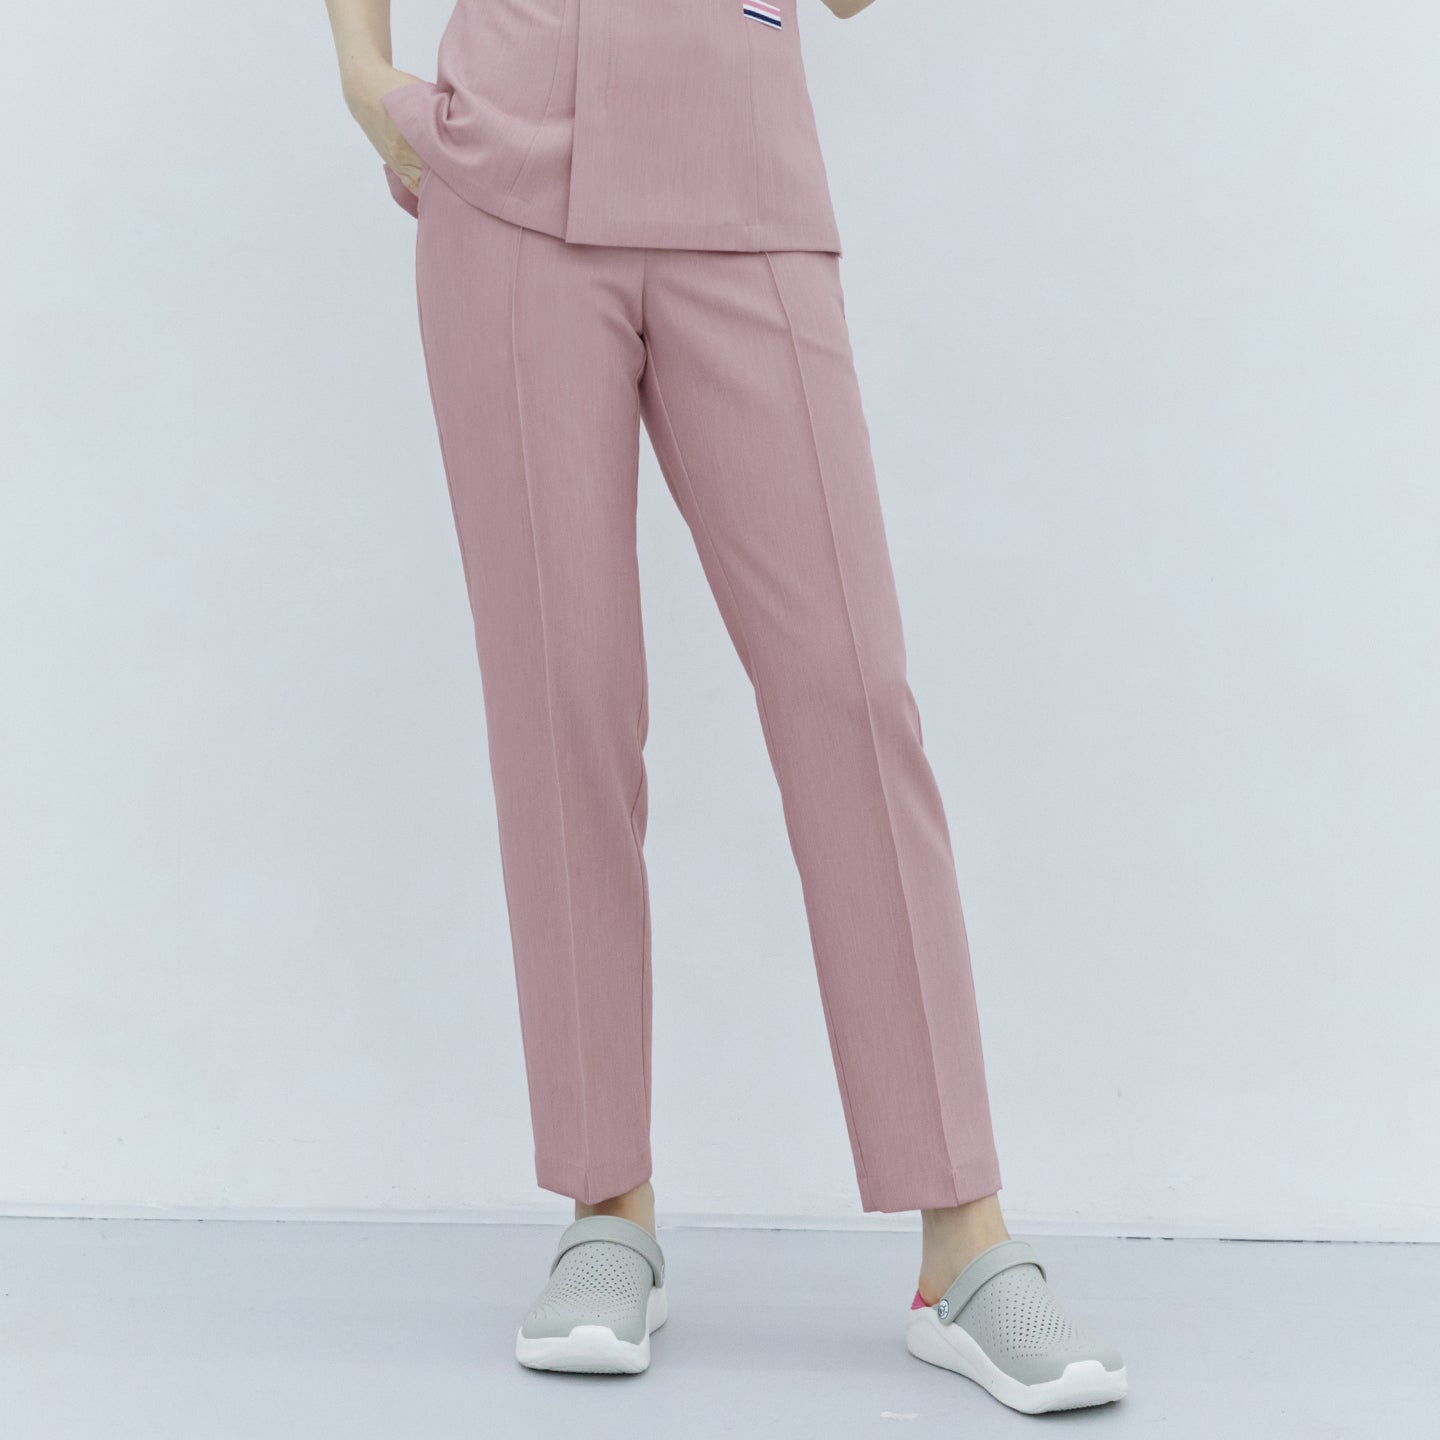  A woman wearing Soft Pink Line Banding Scrub Pants paired with gray shoes, showcasing the front view and fit of the pants,Soft Pink